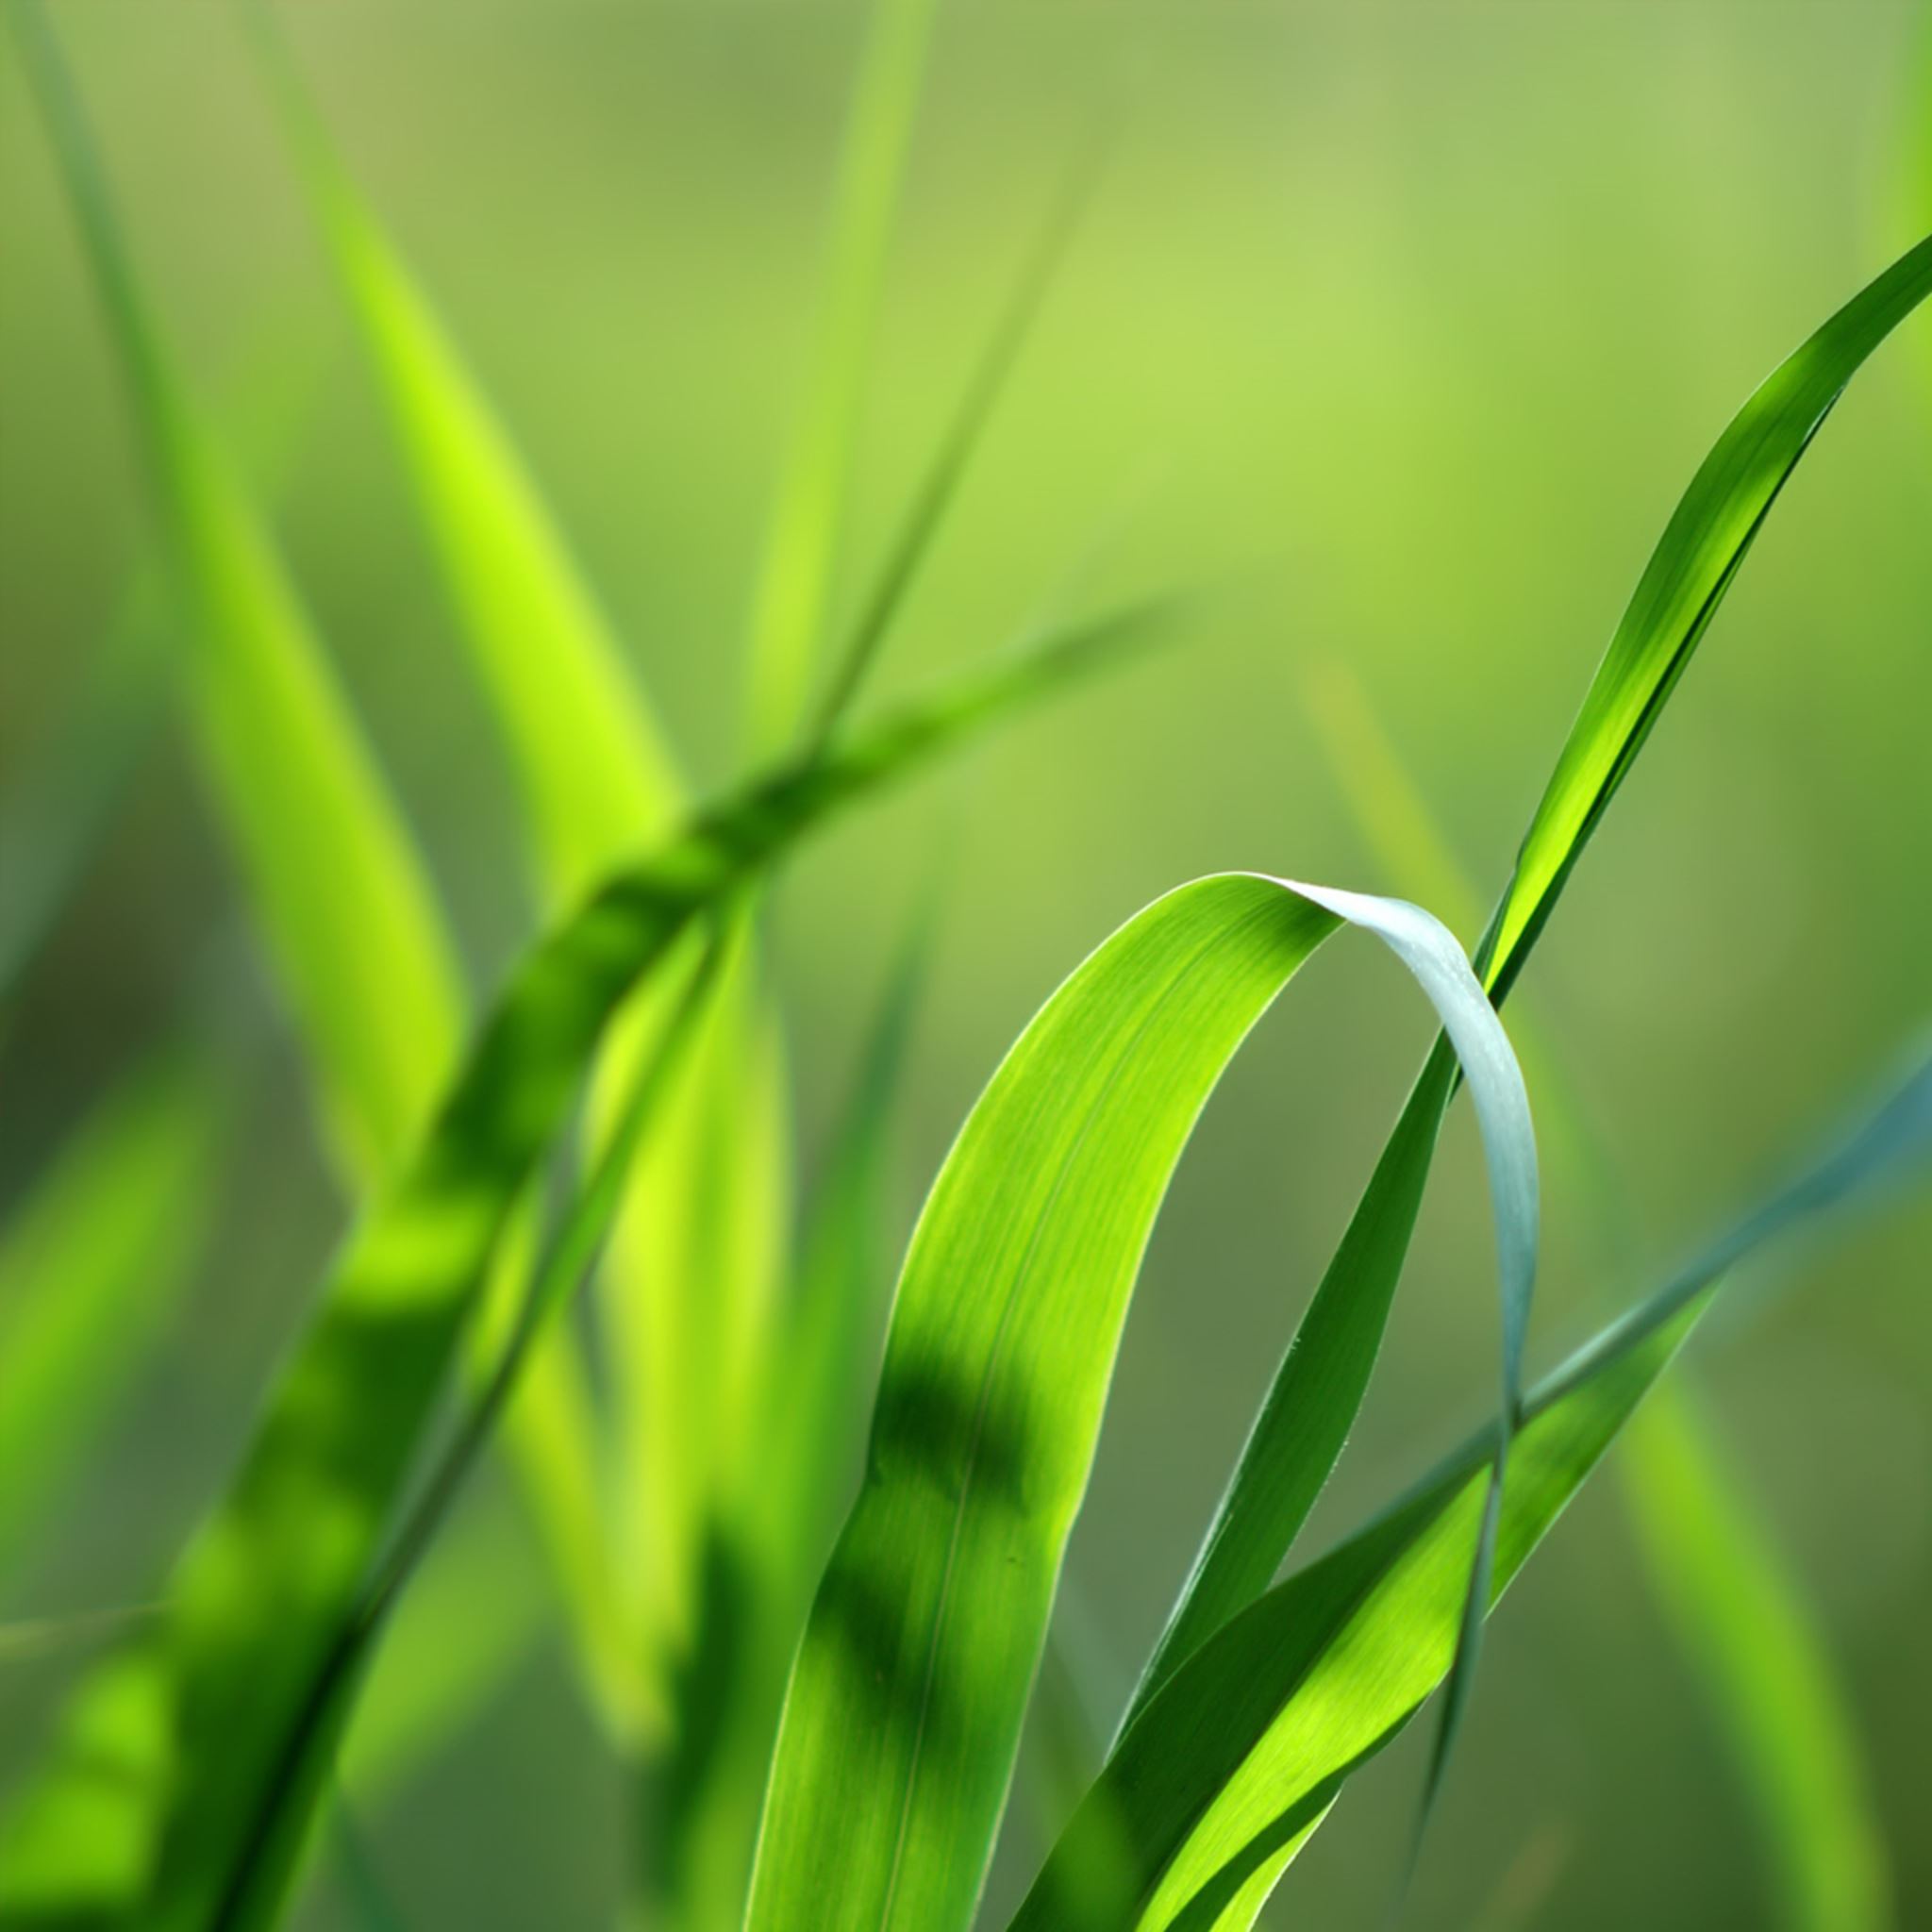 Nature Blades Of Grass iPad Air Wallpapers Free Download